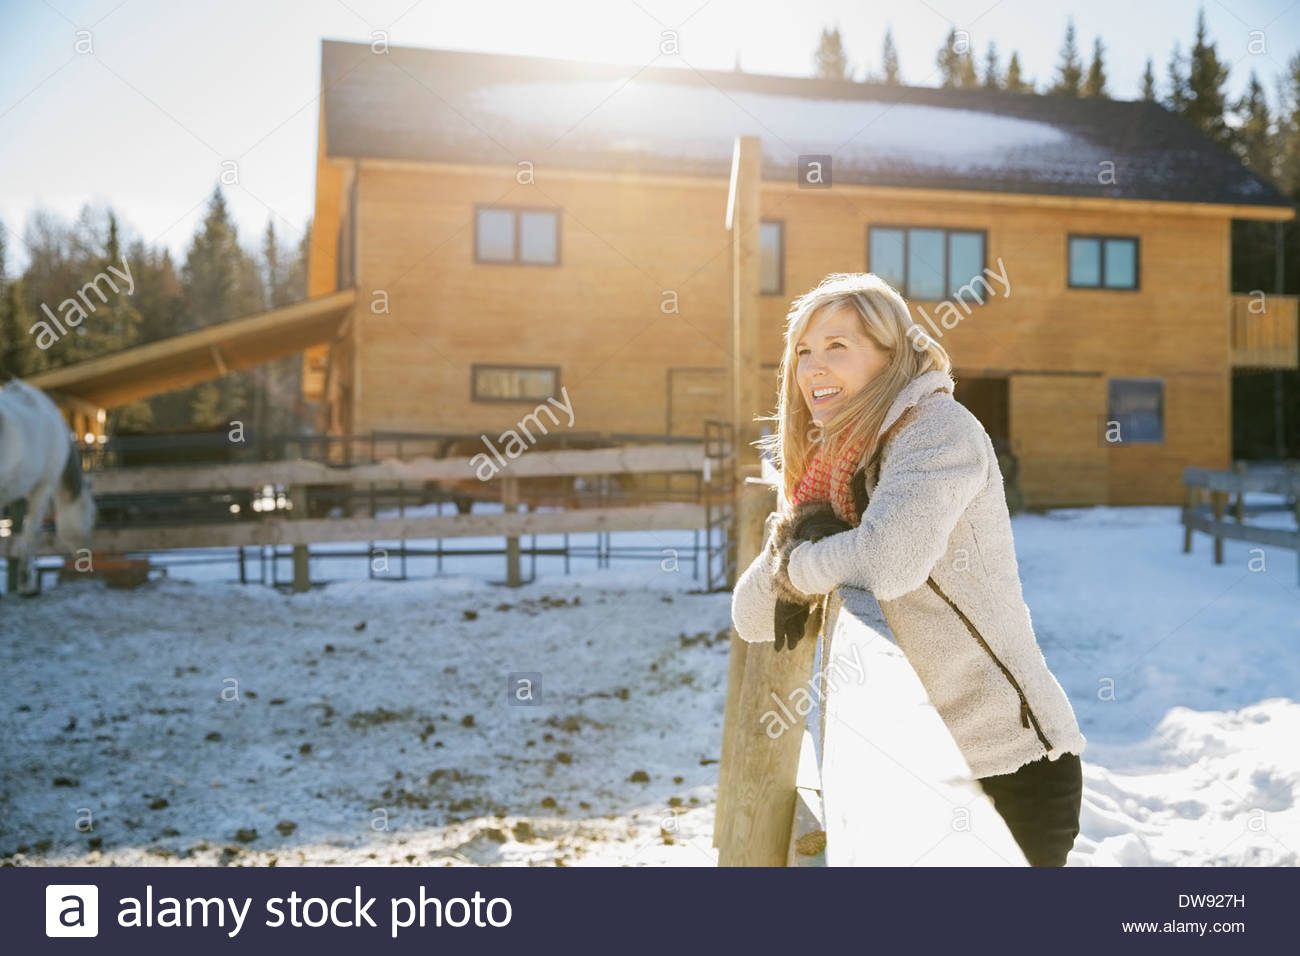 Smiling woman looking out on horse ranch Stock Photo